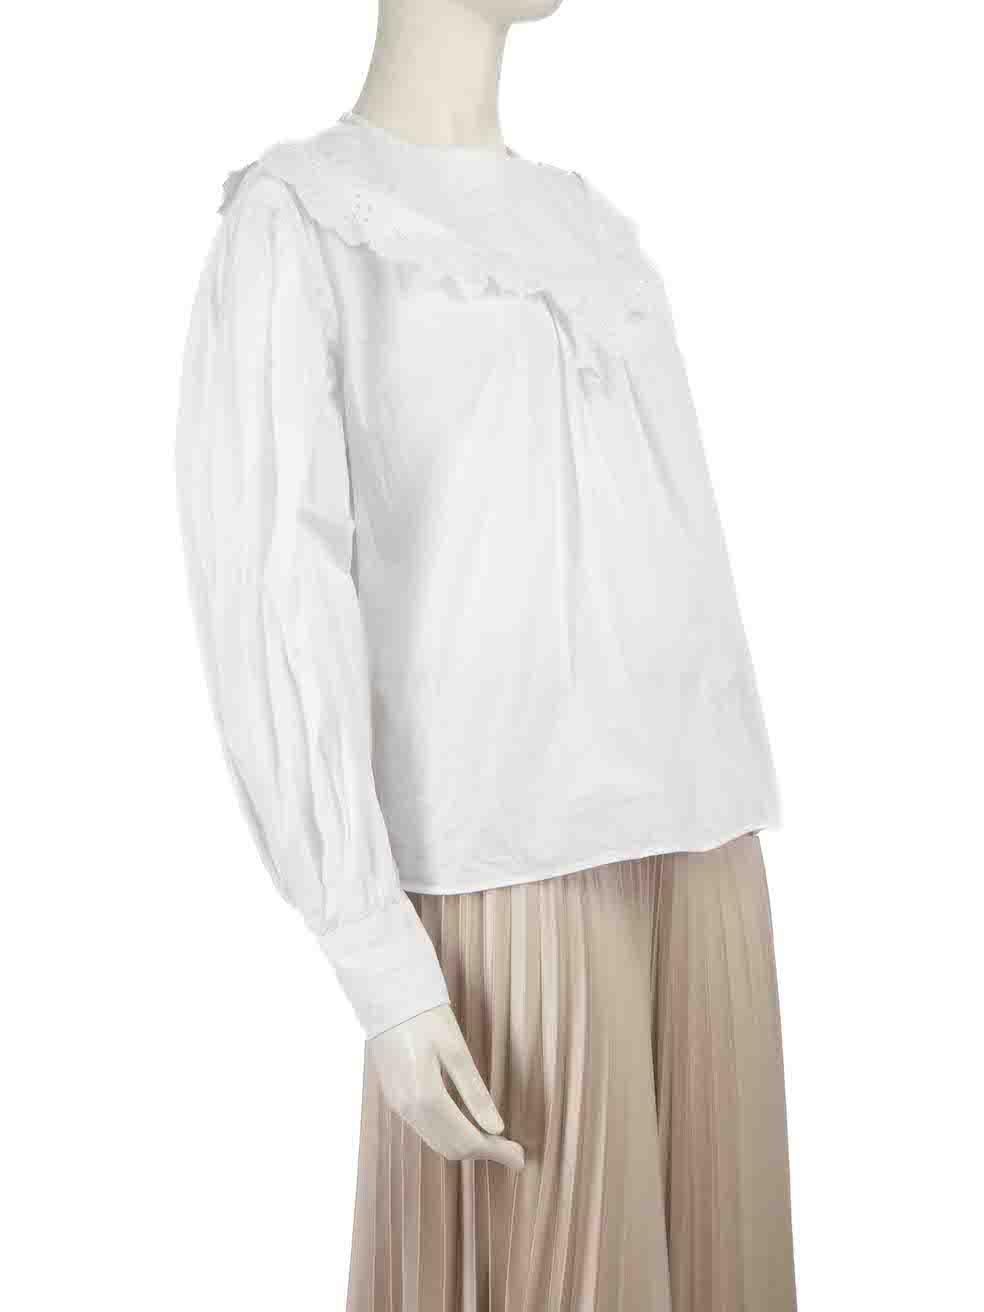 CONDITION is Very good. Hardly any visible wear to shirt is evident on this used Isabel Marant Etoile designer resale item.
 
Details
White
Cotton
Blouse
Puff sleeves
Lace trimmed
Round neckline
Buttoned cuffs
Back button closure

Made in India
